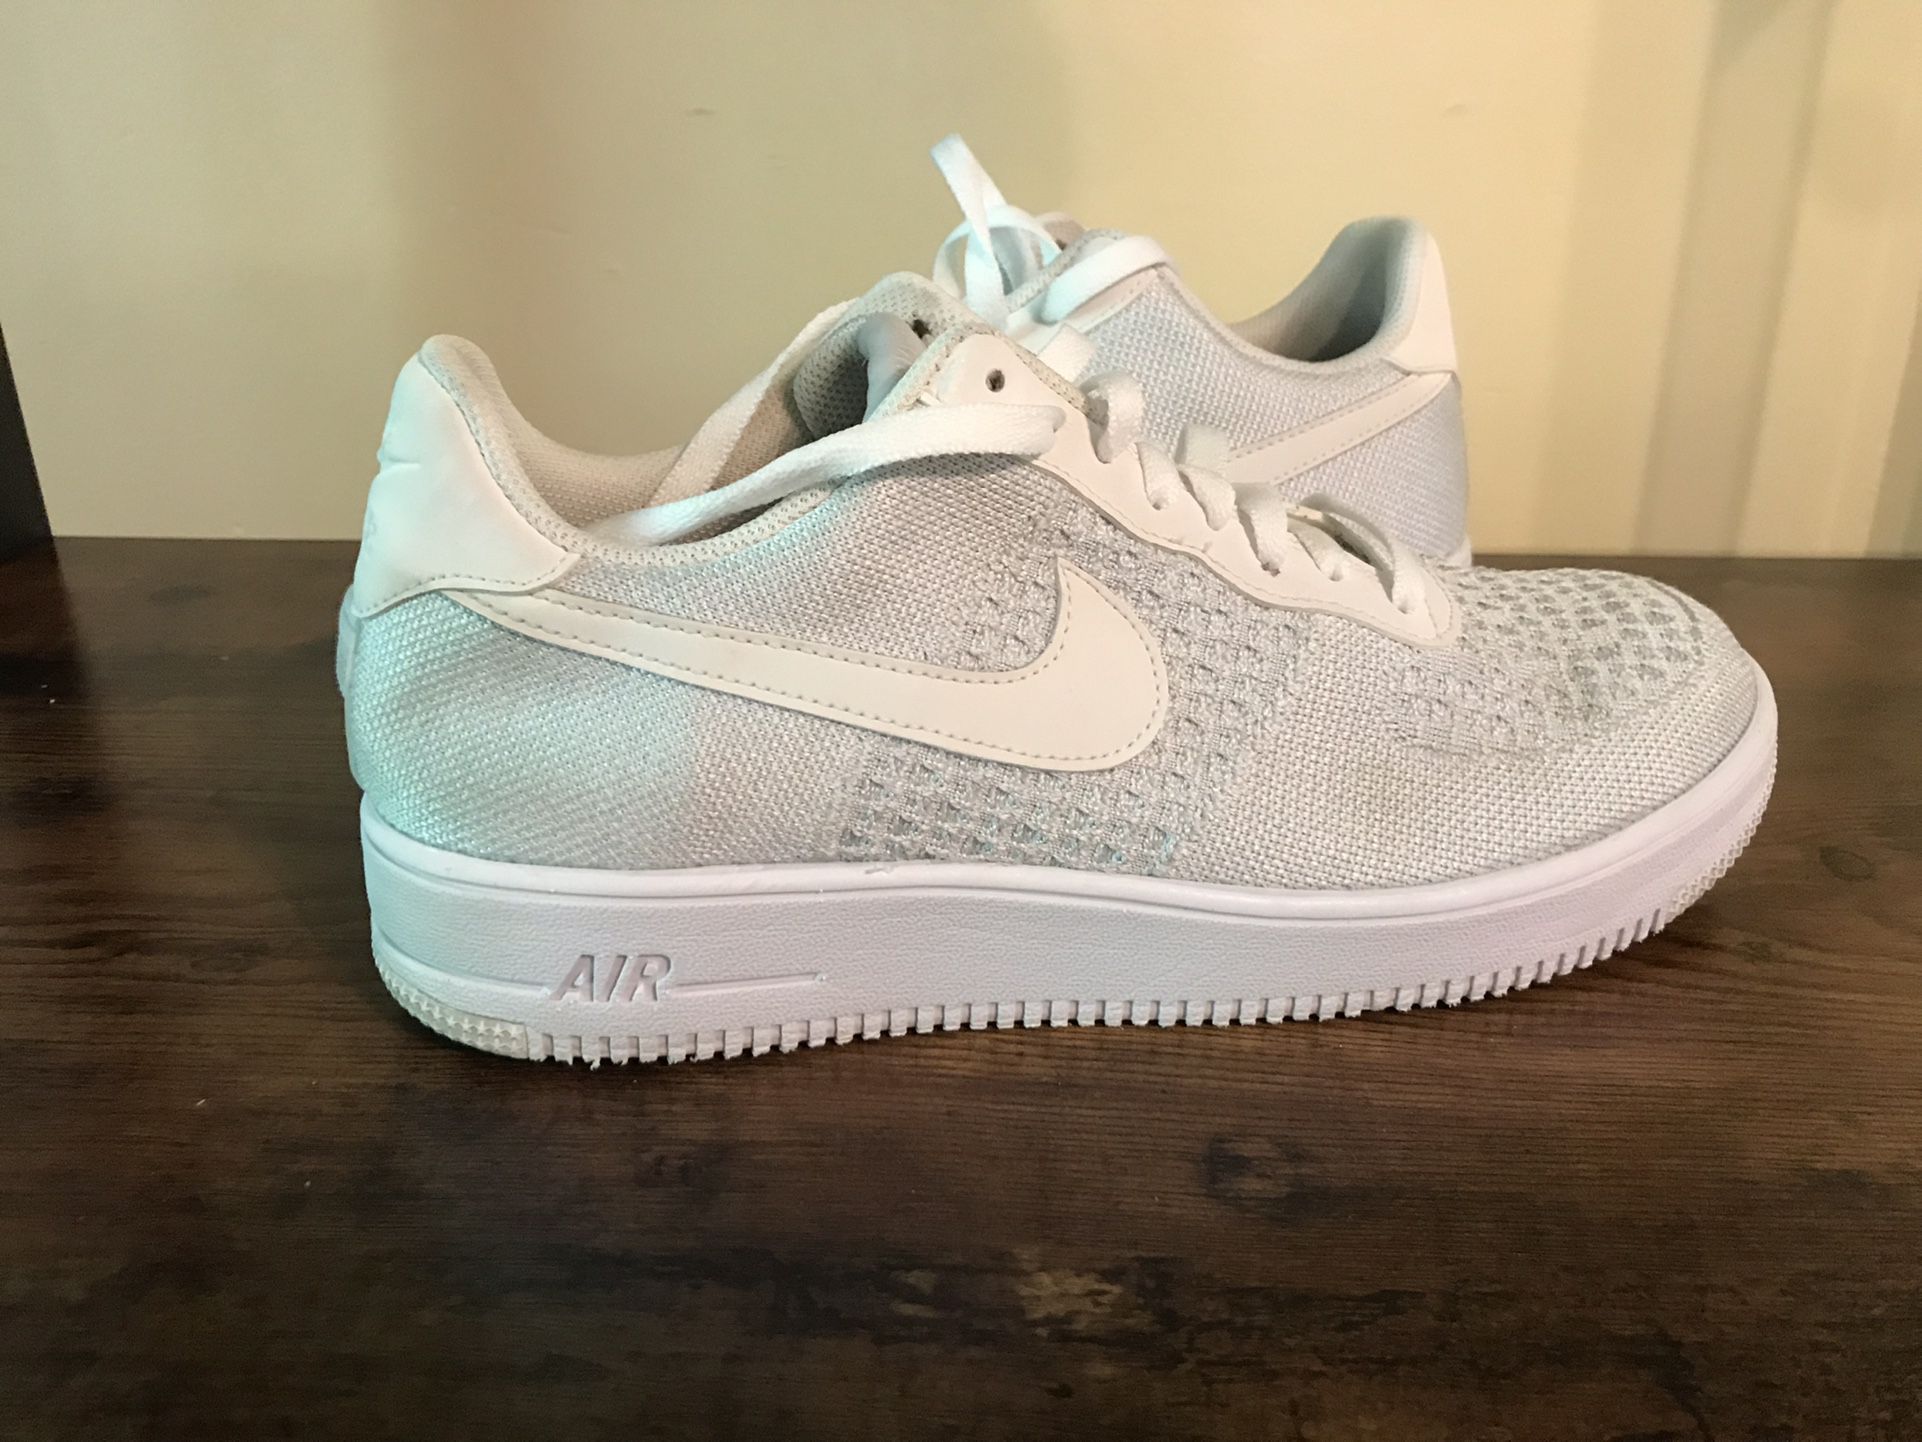 Nike Force 1 Flyknit White Pure Platinum for Sale in Baltimore, MD - OfferUp